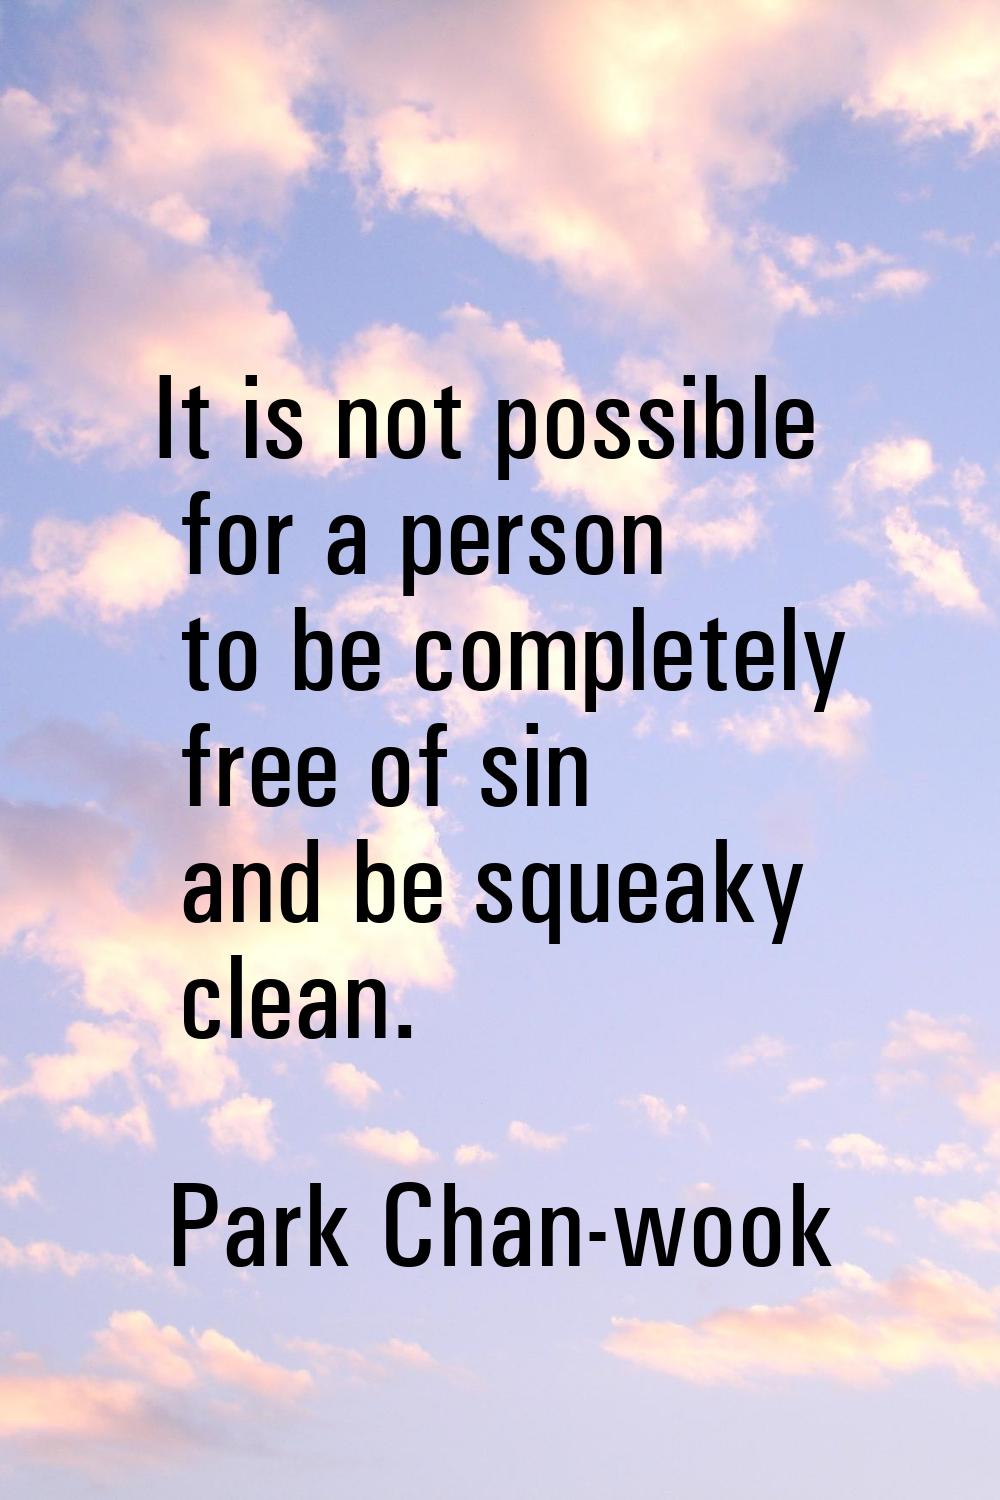 It is not possible for a person to be completely free of sin and be squeaky clean.